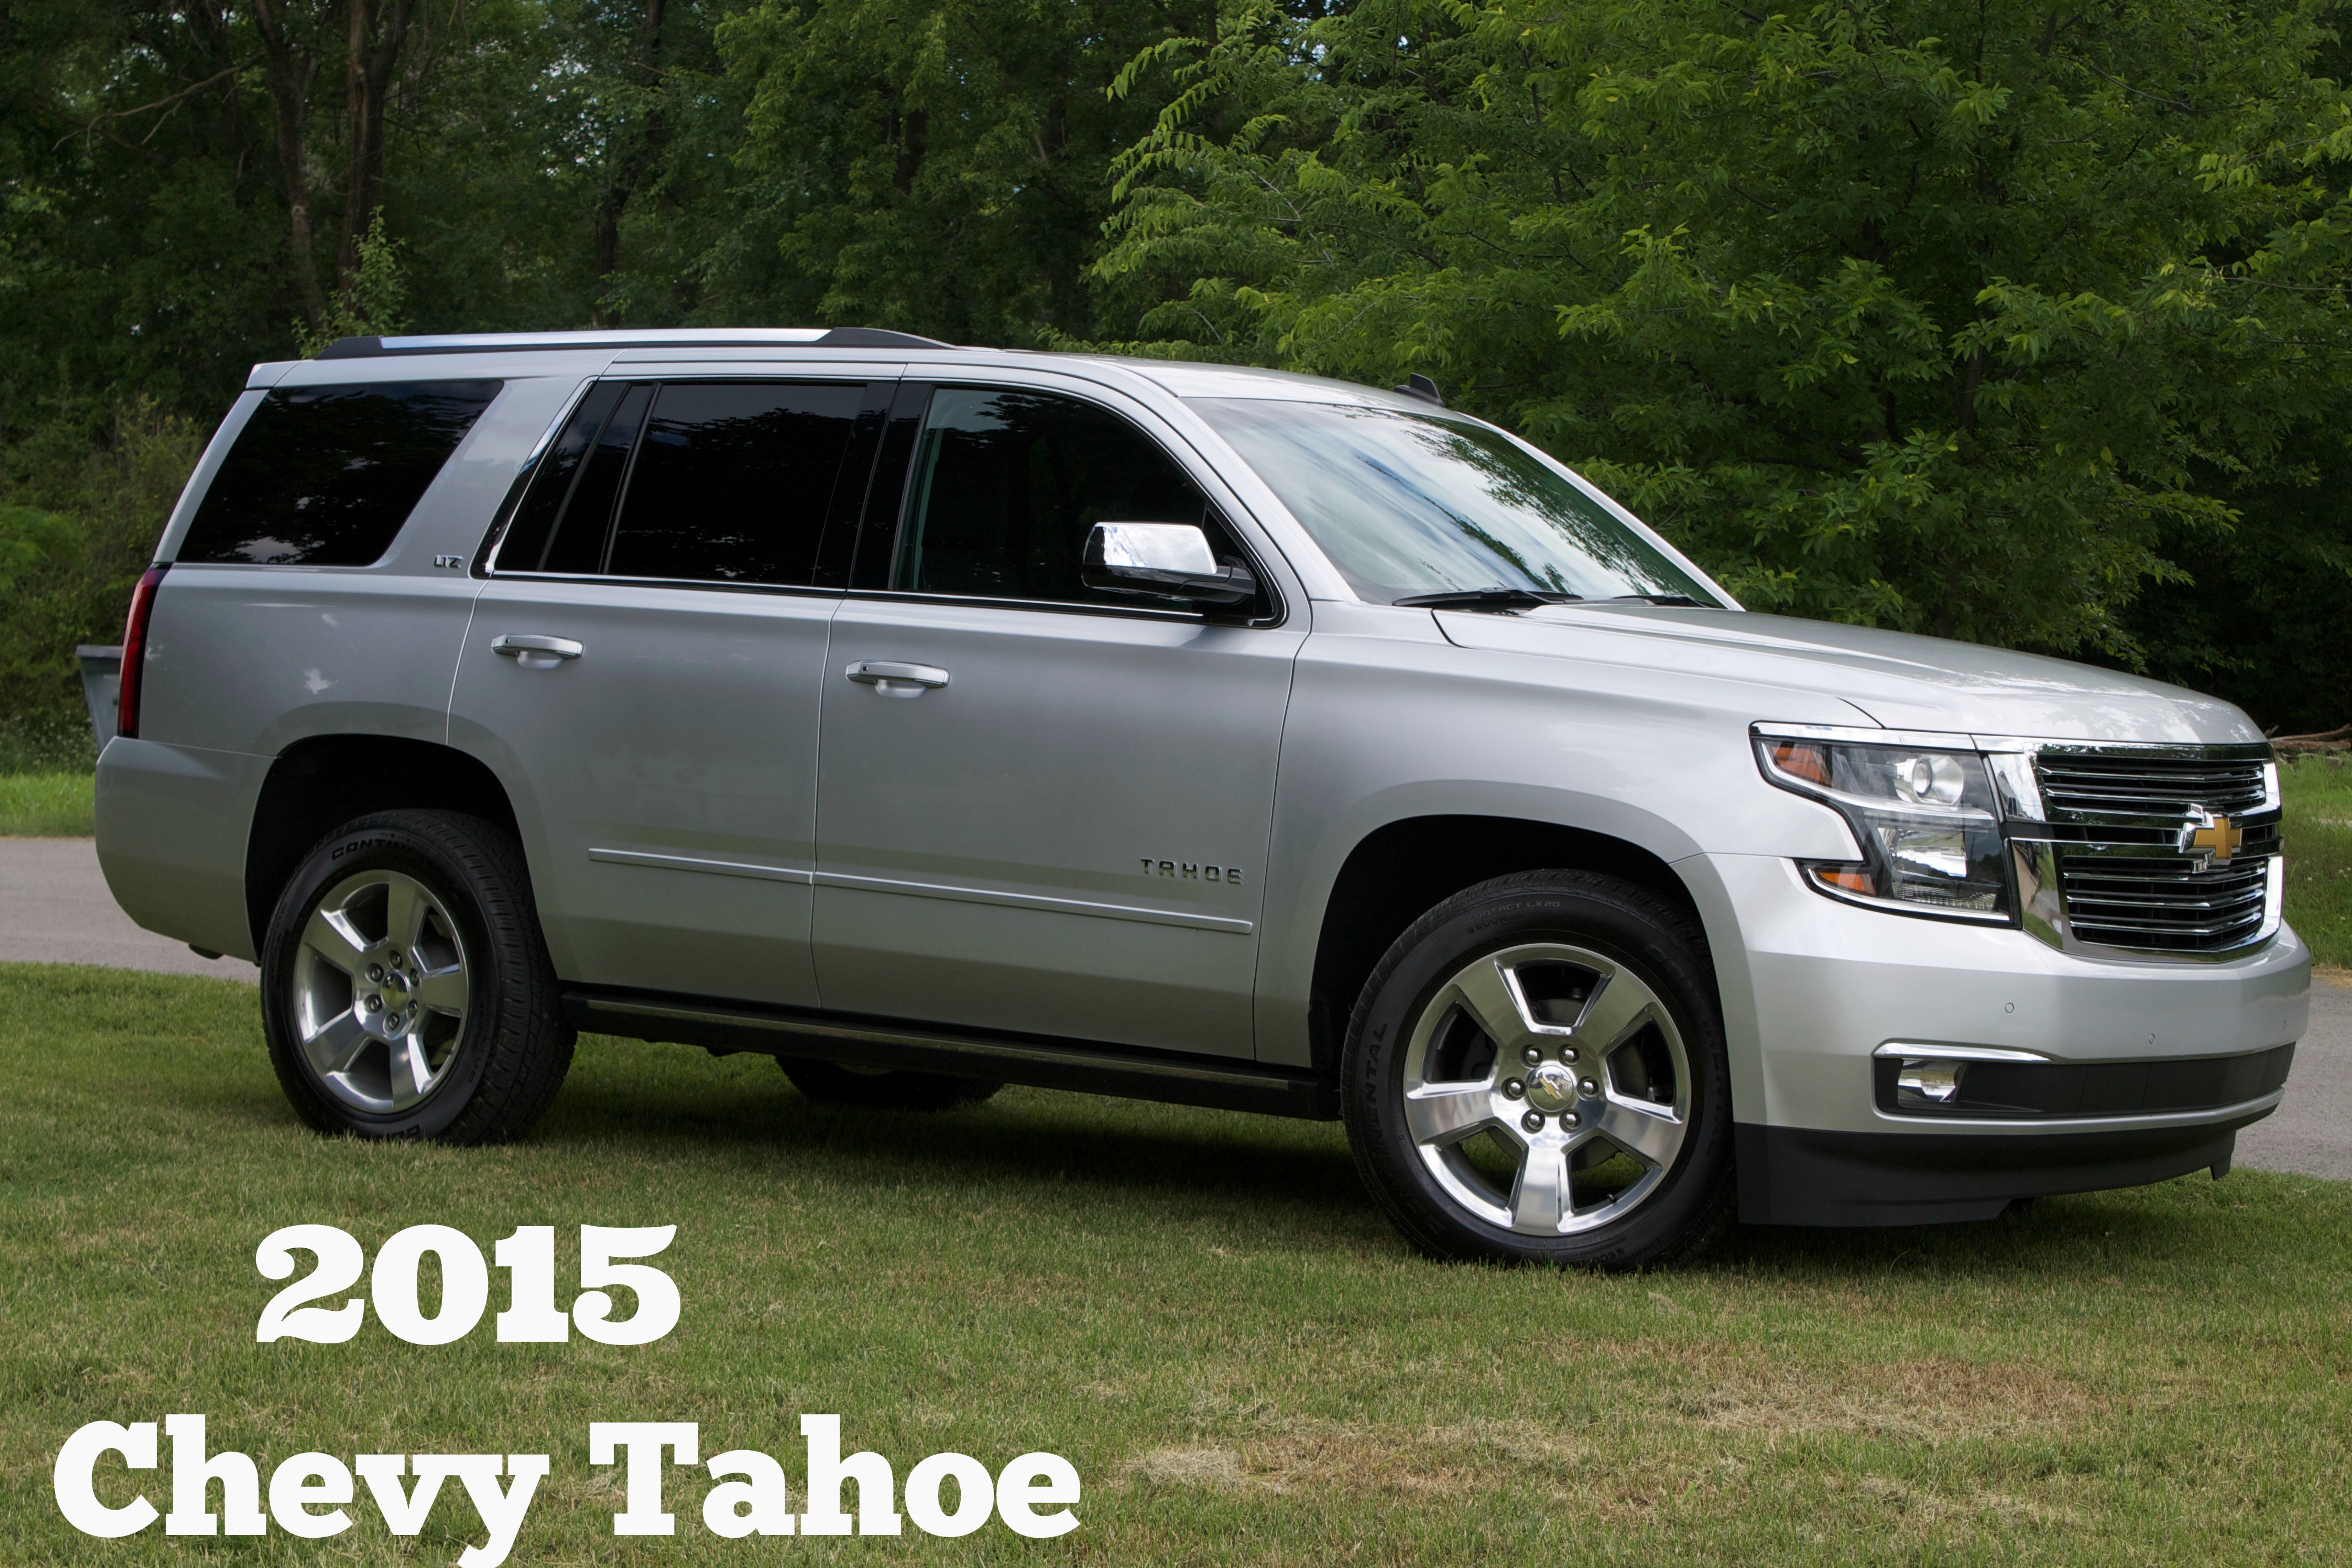 Review Of The All New 2015 Chevy Tahoe